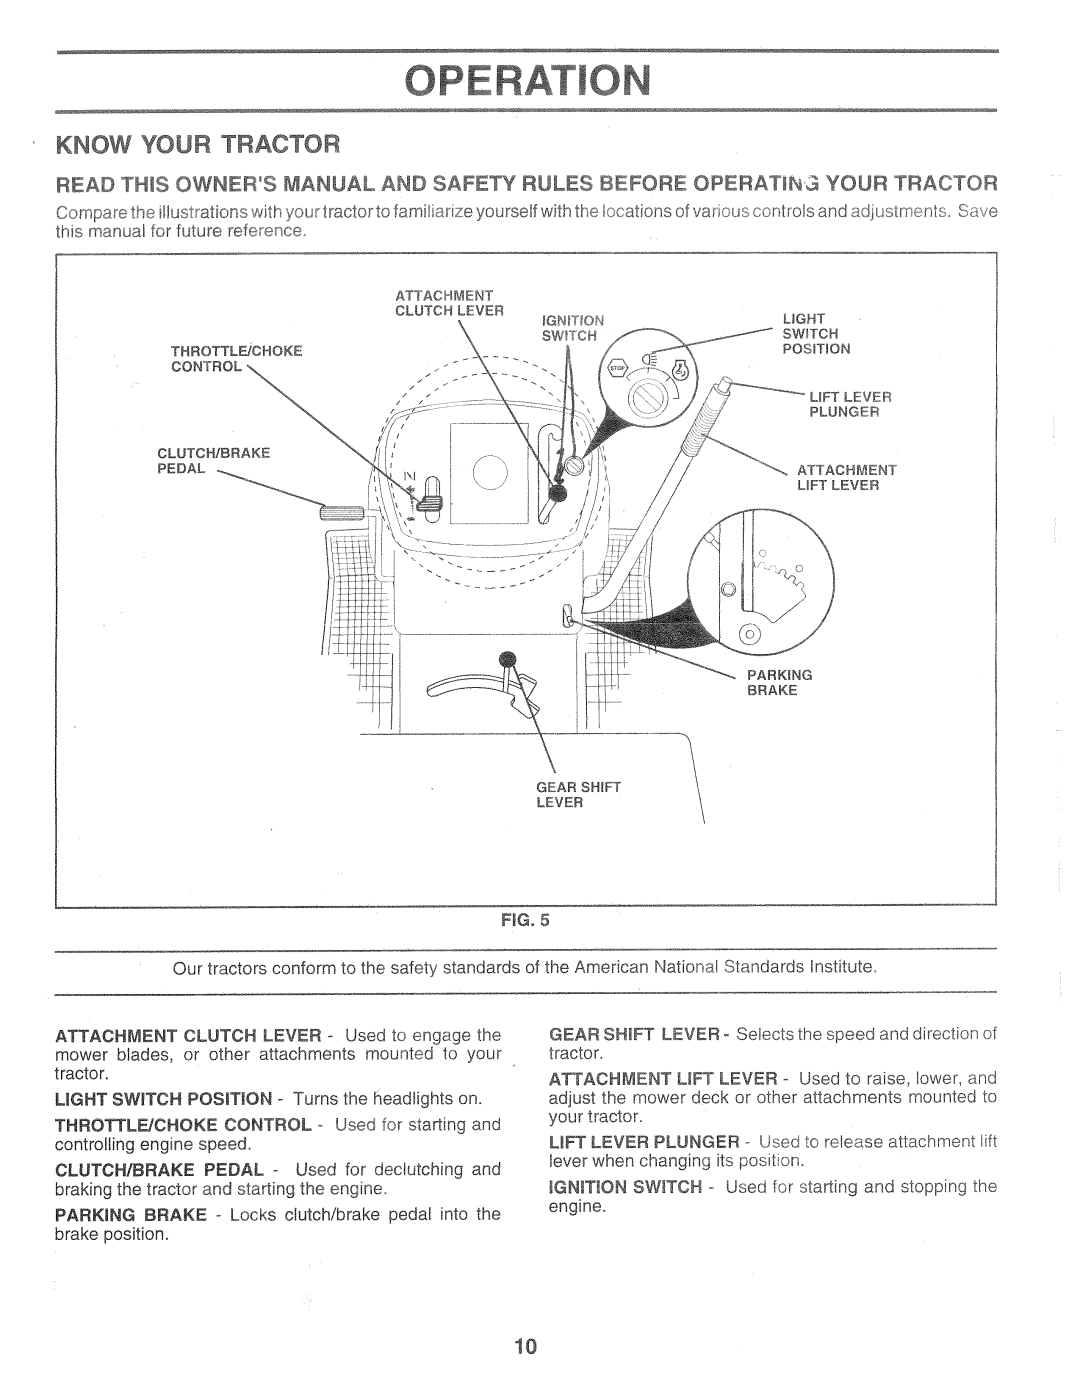 Weed Eater CHD12538A, 159411 manual 